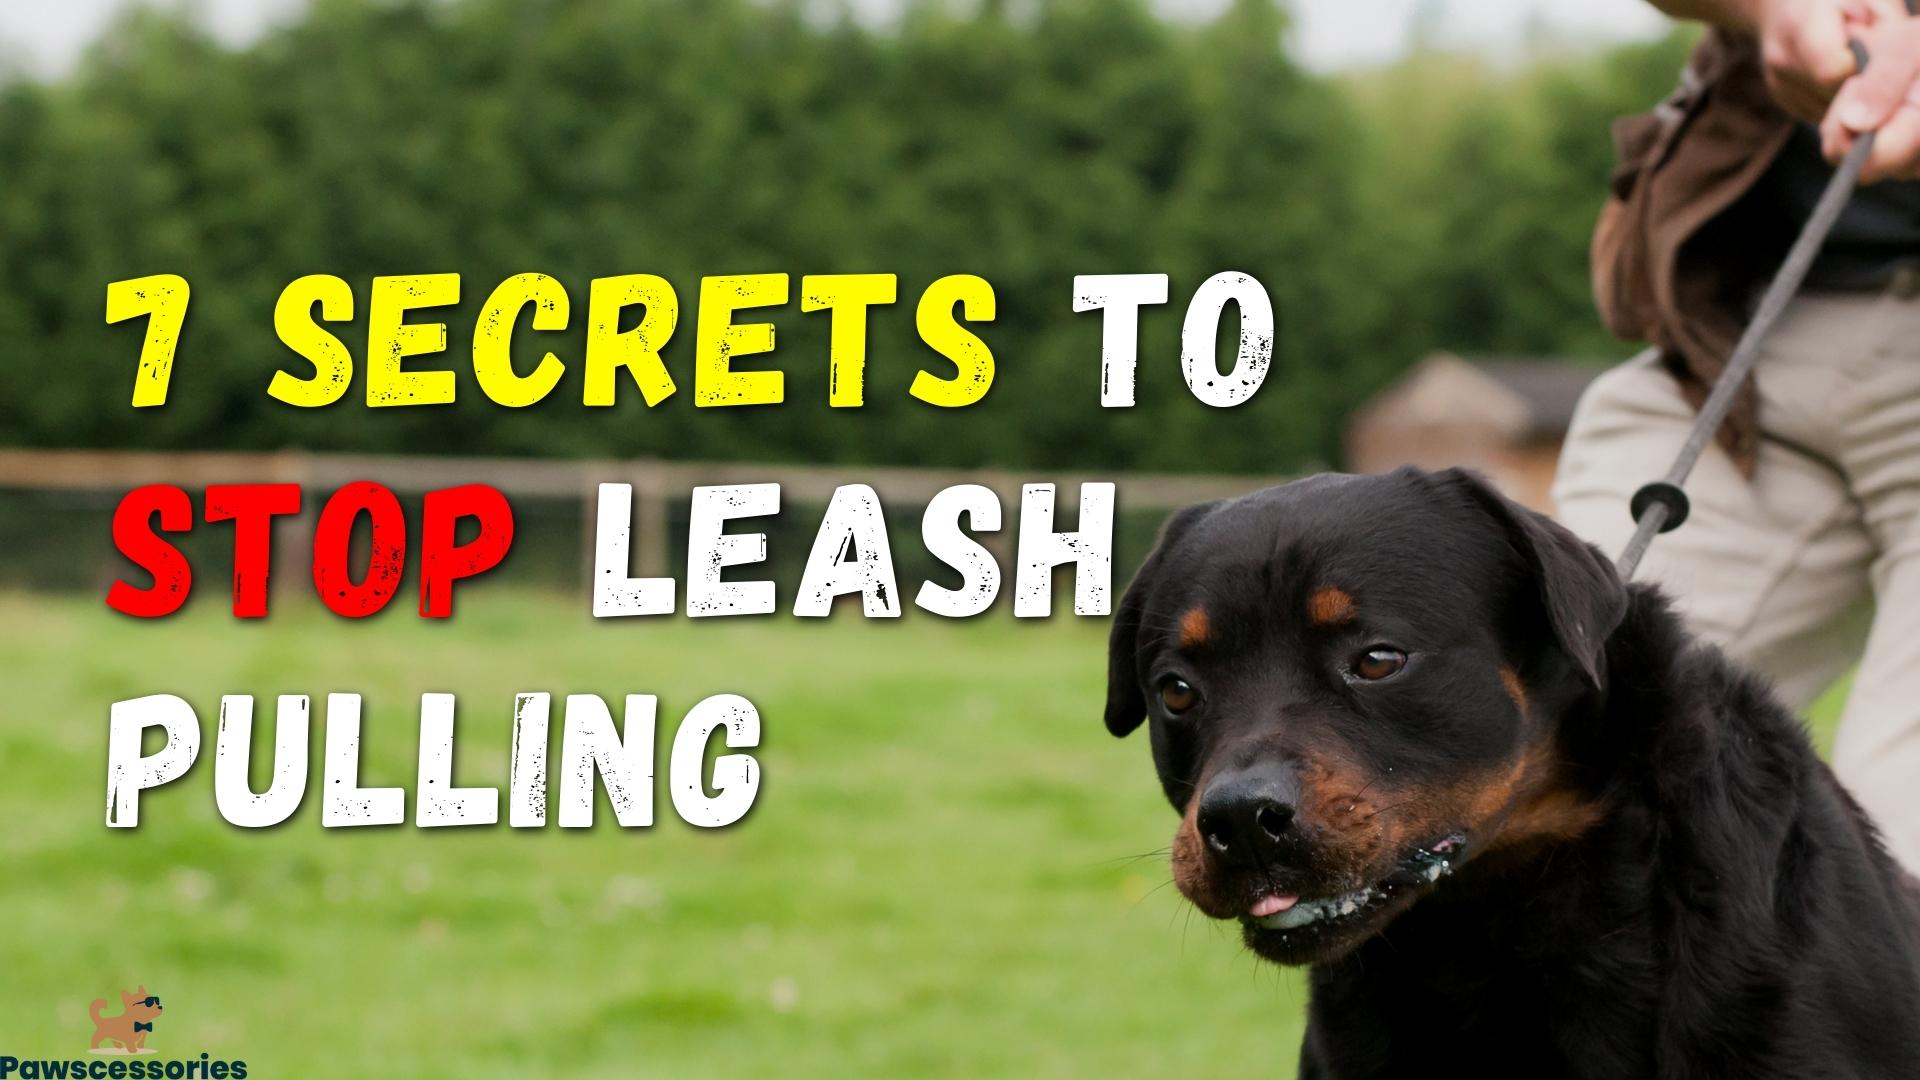 7 Secrets To Stop Leash Pulling In Just 10 Minutes Per Day